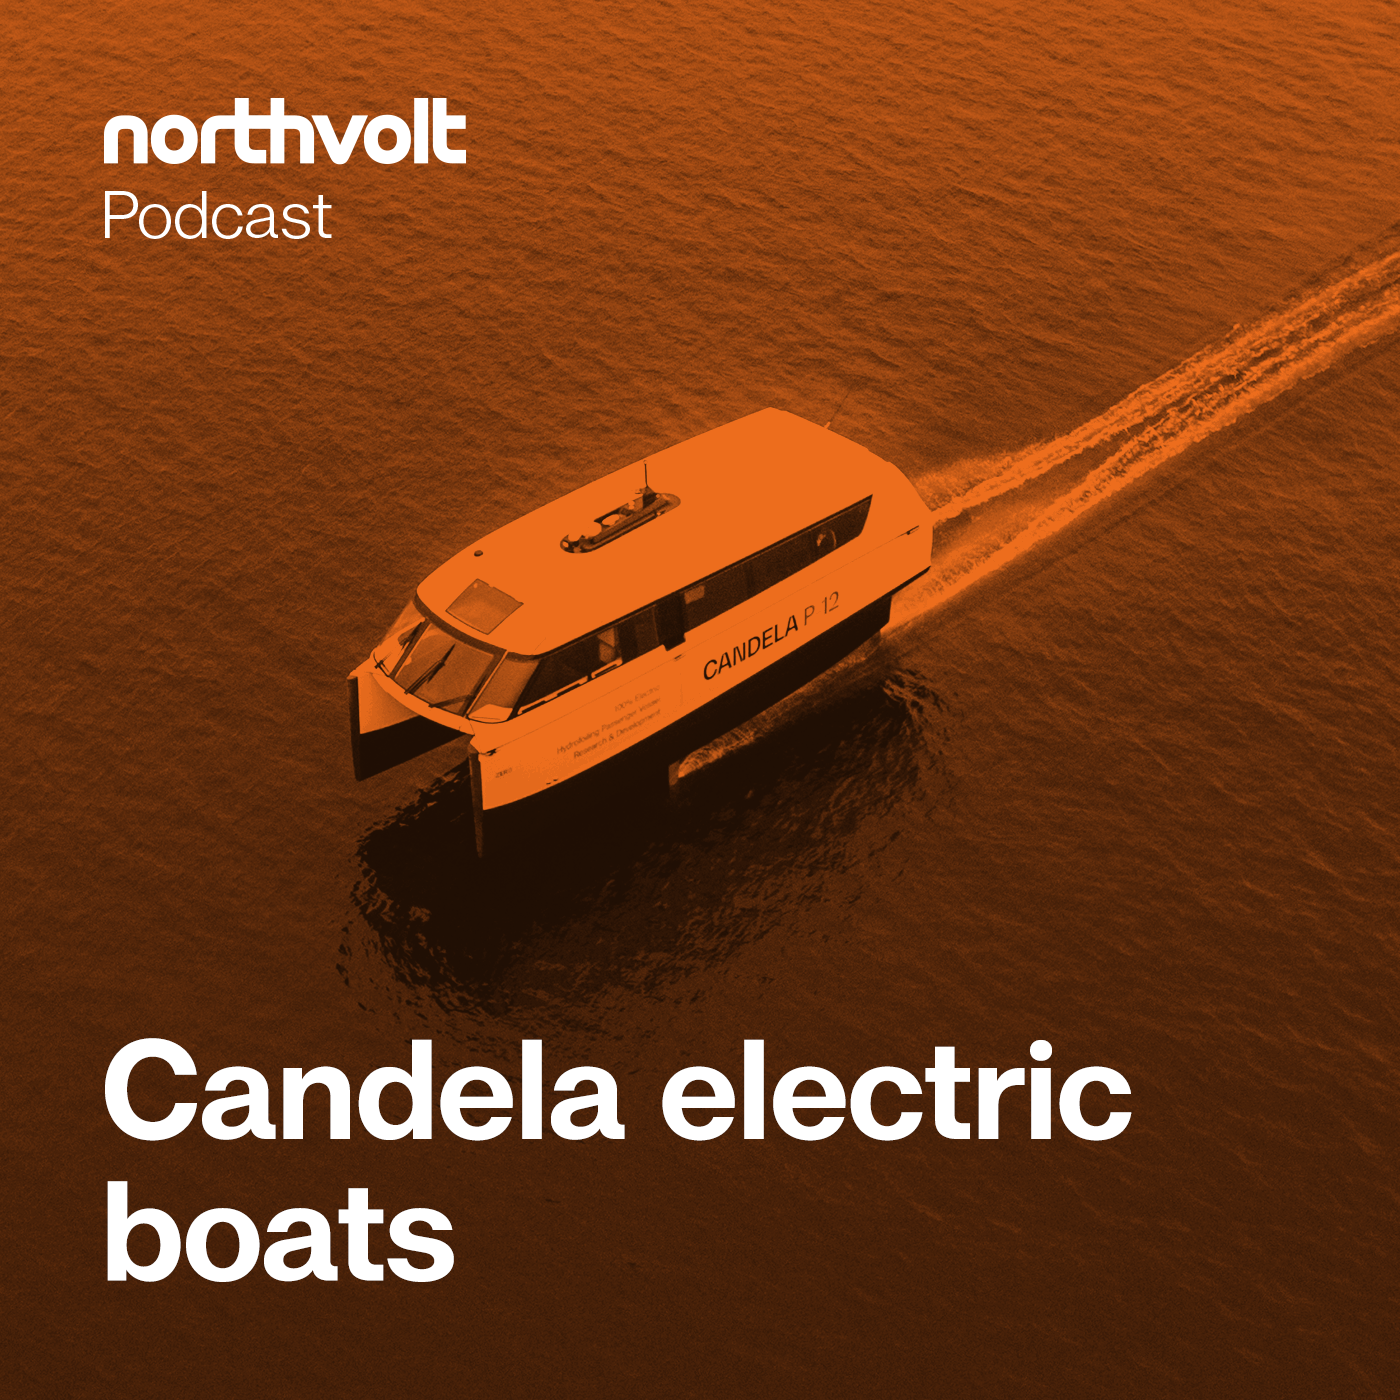 The future of energy: Candela electric boats